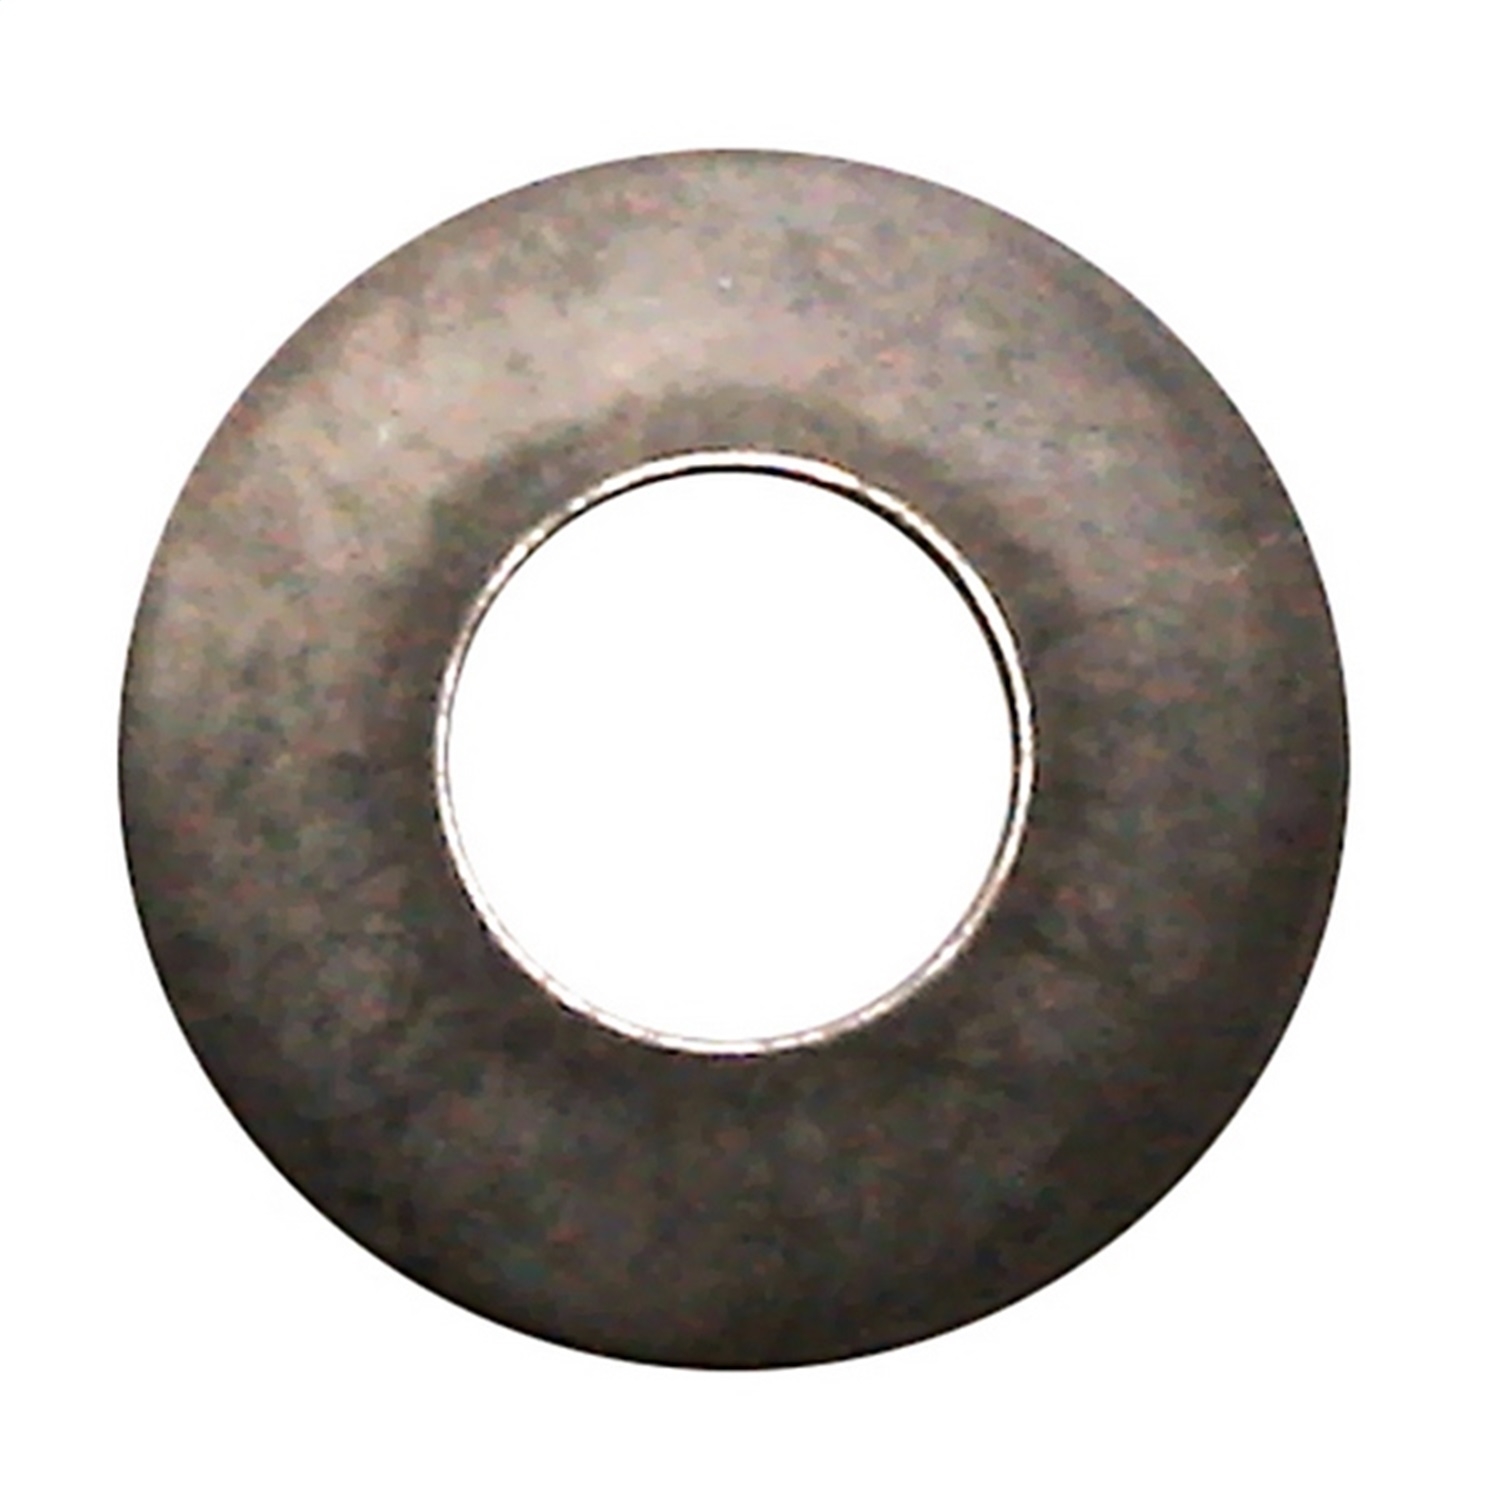 Omix Pinion Thrust Washer For Dana 30, 1996-2006 Jeep Wrangler Tj By Omix, BKGF-16584.06